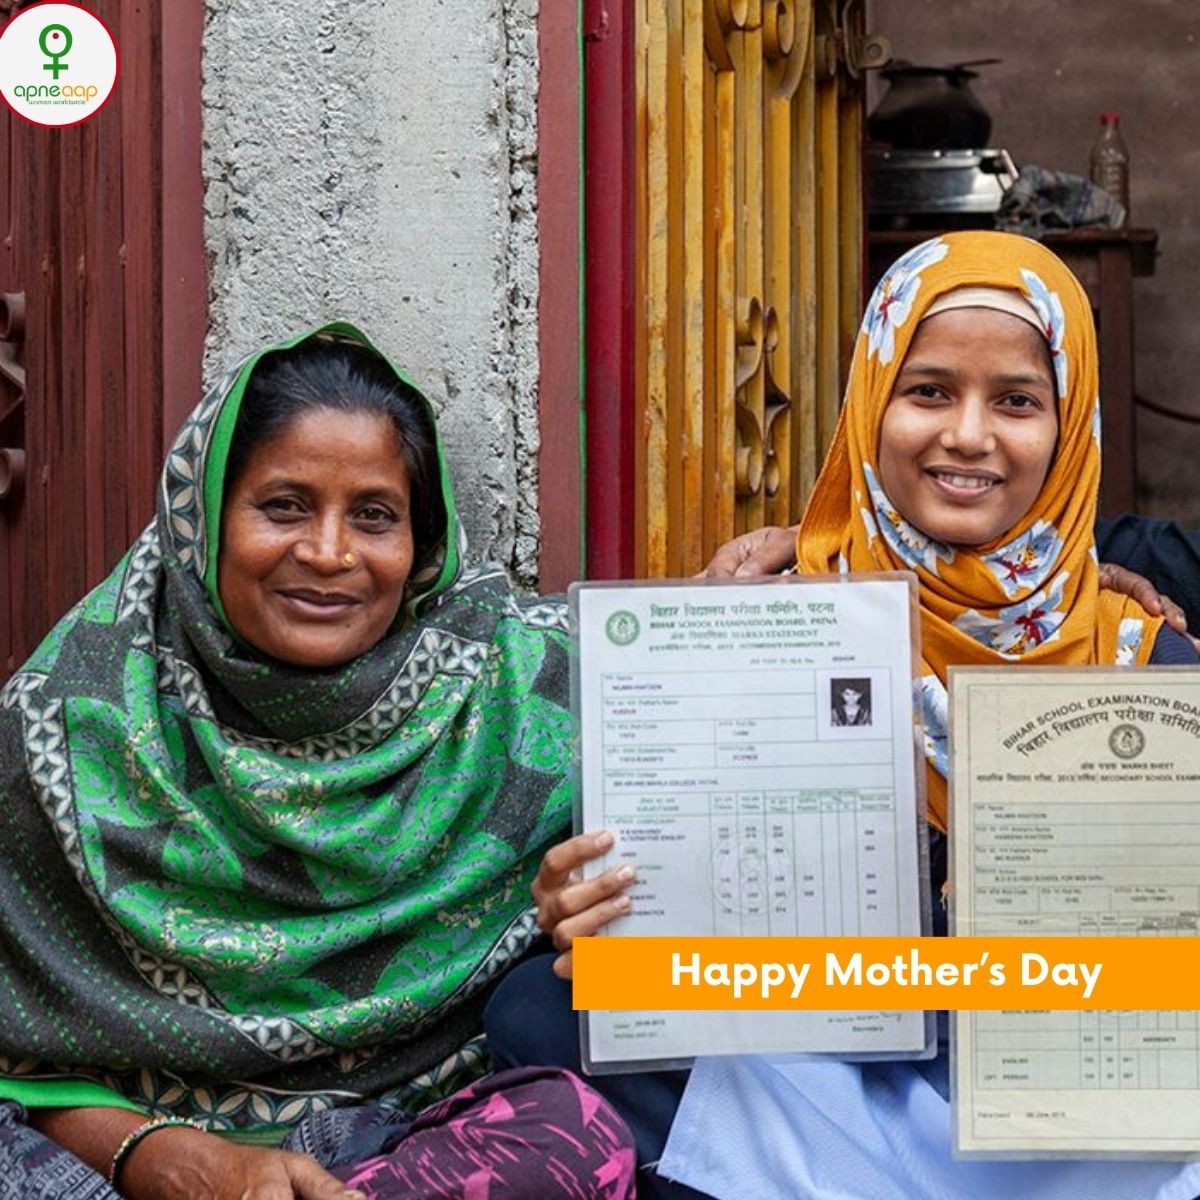 On this #MothersDay, we honor the resilience and strength of the mothers in our Apne Aap community. These women, who have faced unimaginable challenges, are the backbone of their families and our movement. We stand in awe of their courage and determination. 

#IKickandIFly